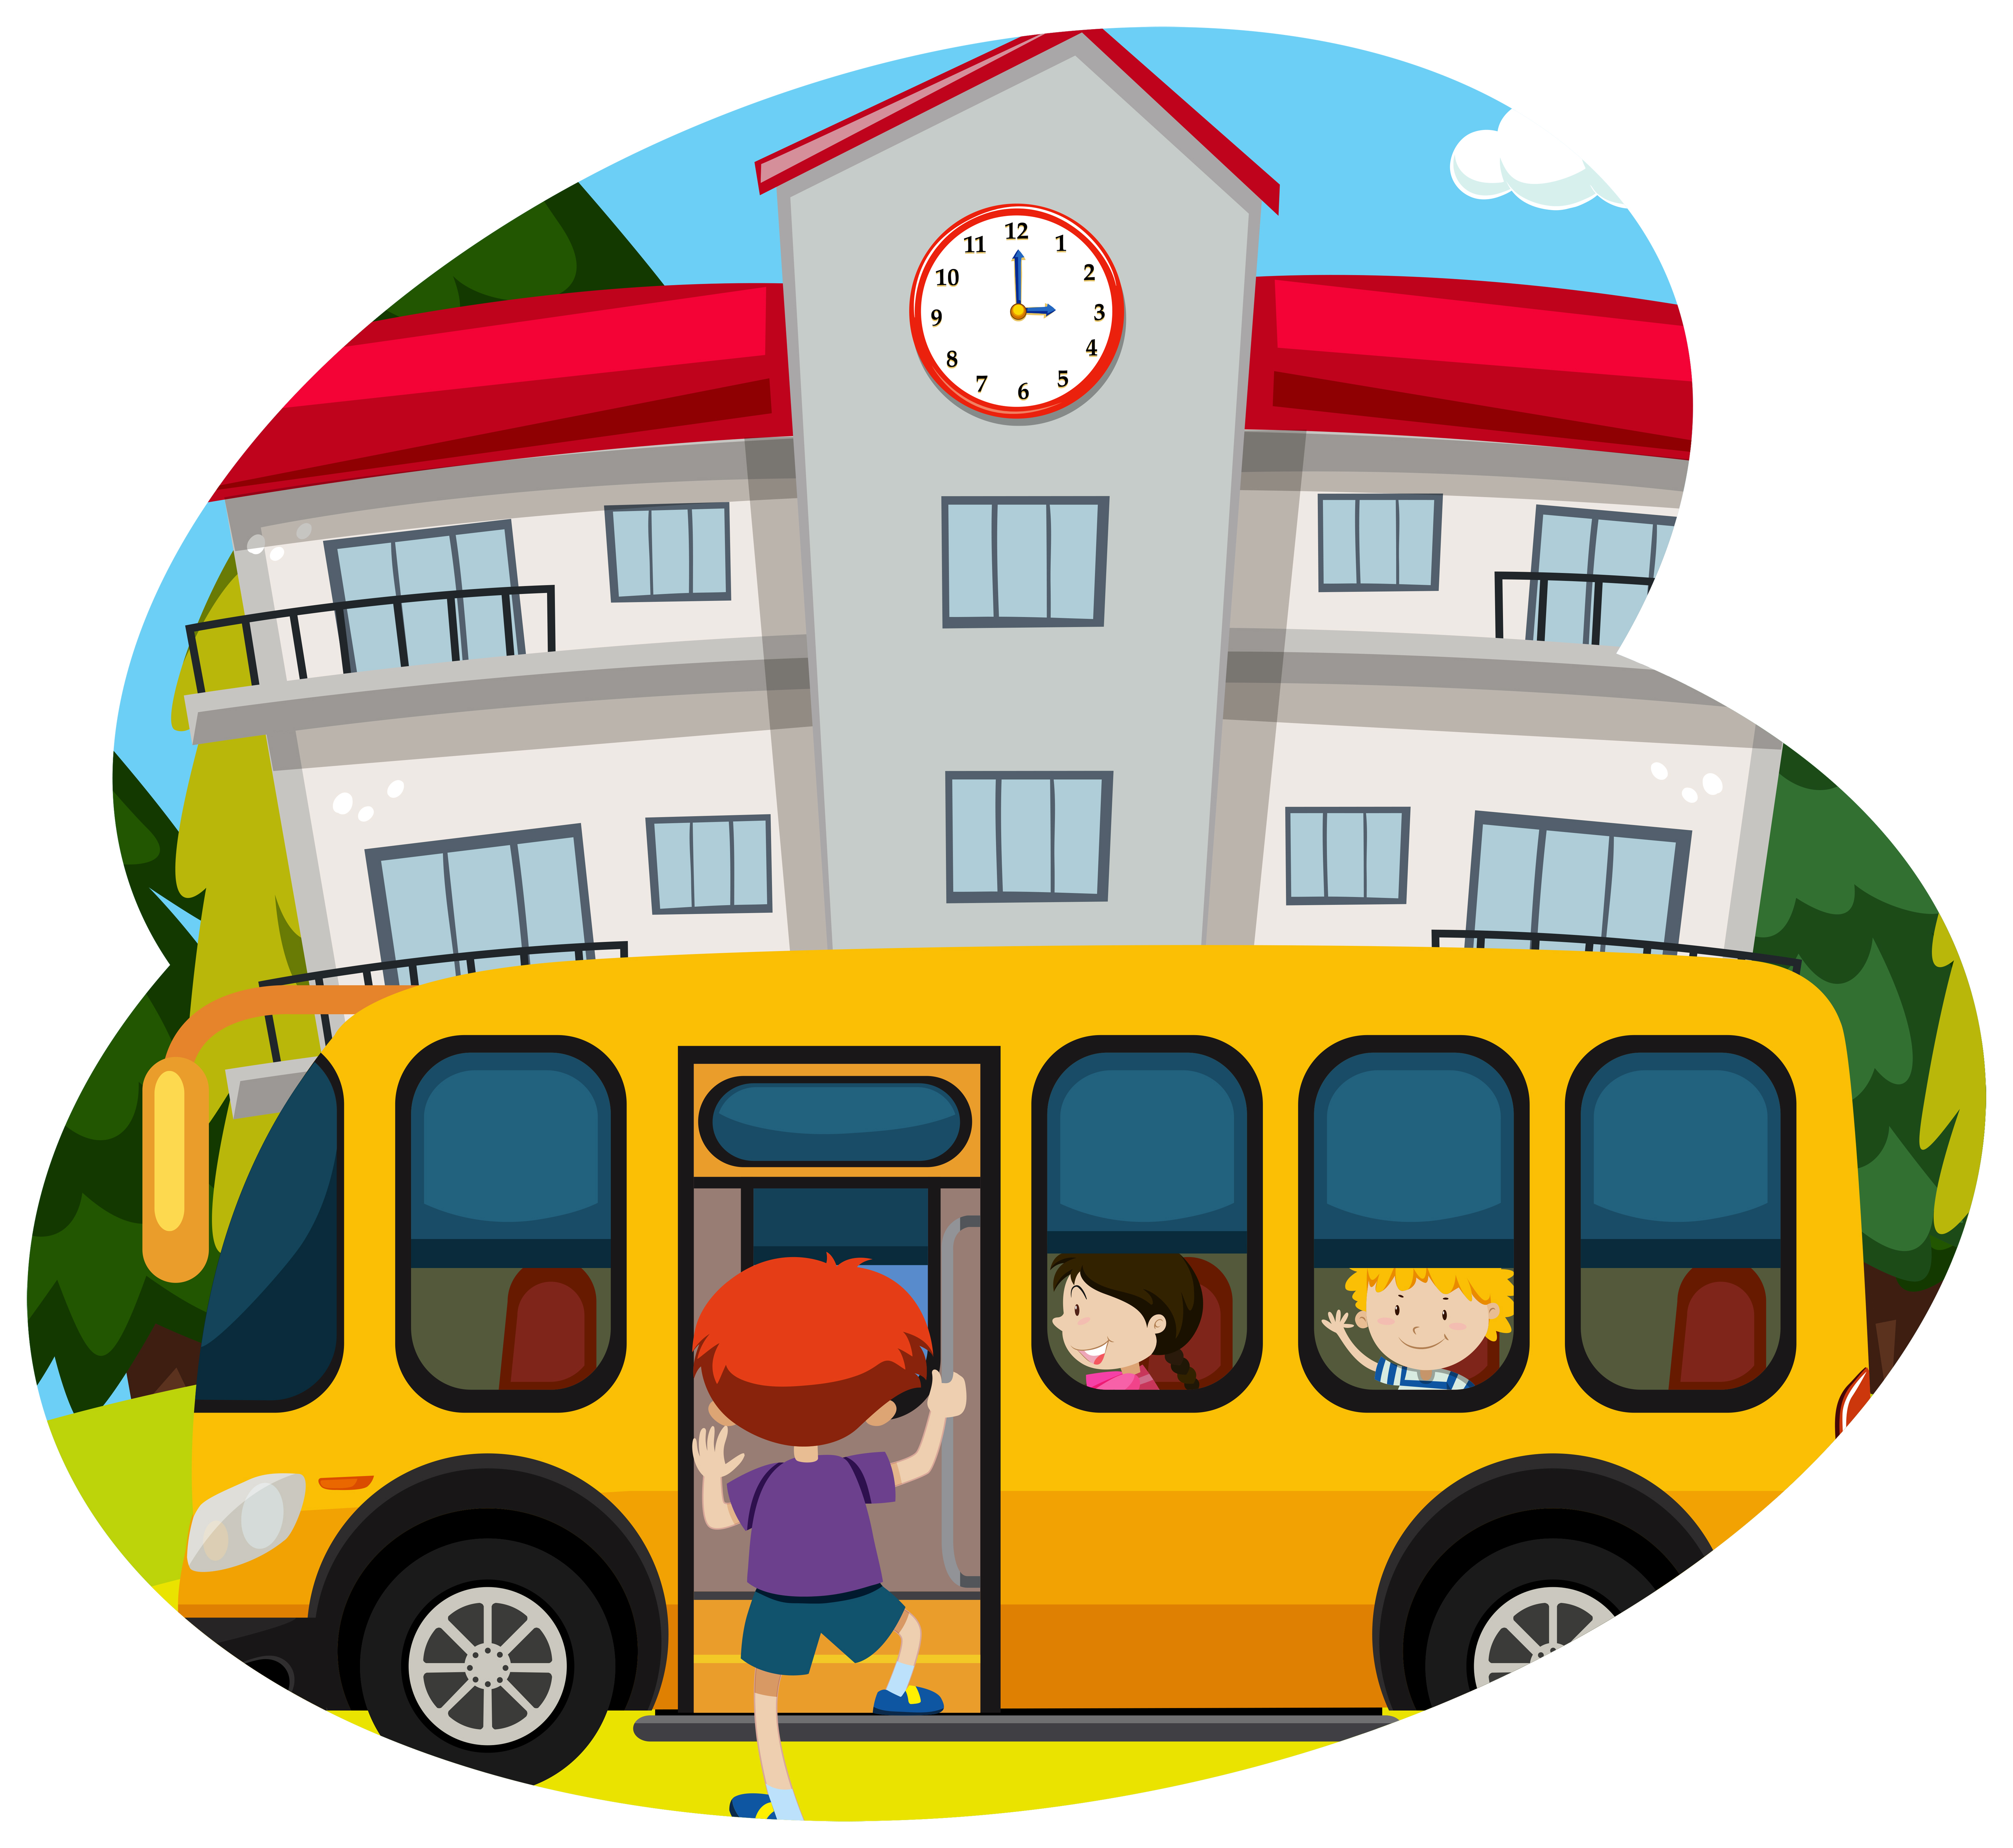 Pick up from school. Schoolbus in Front of School. Bus pick up for School. Education Bus. Expensive car Front of School illustration.